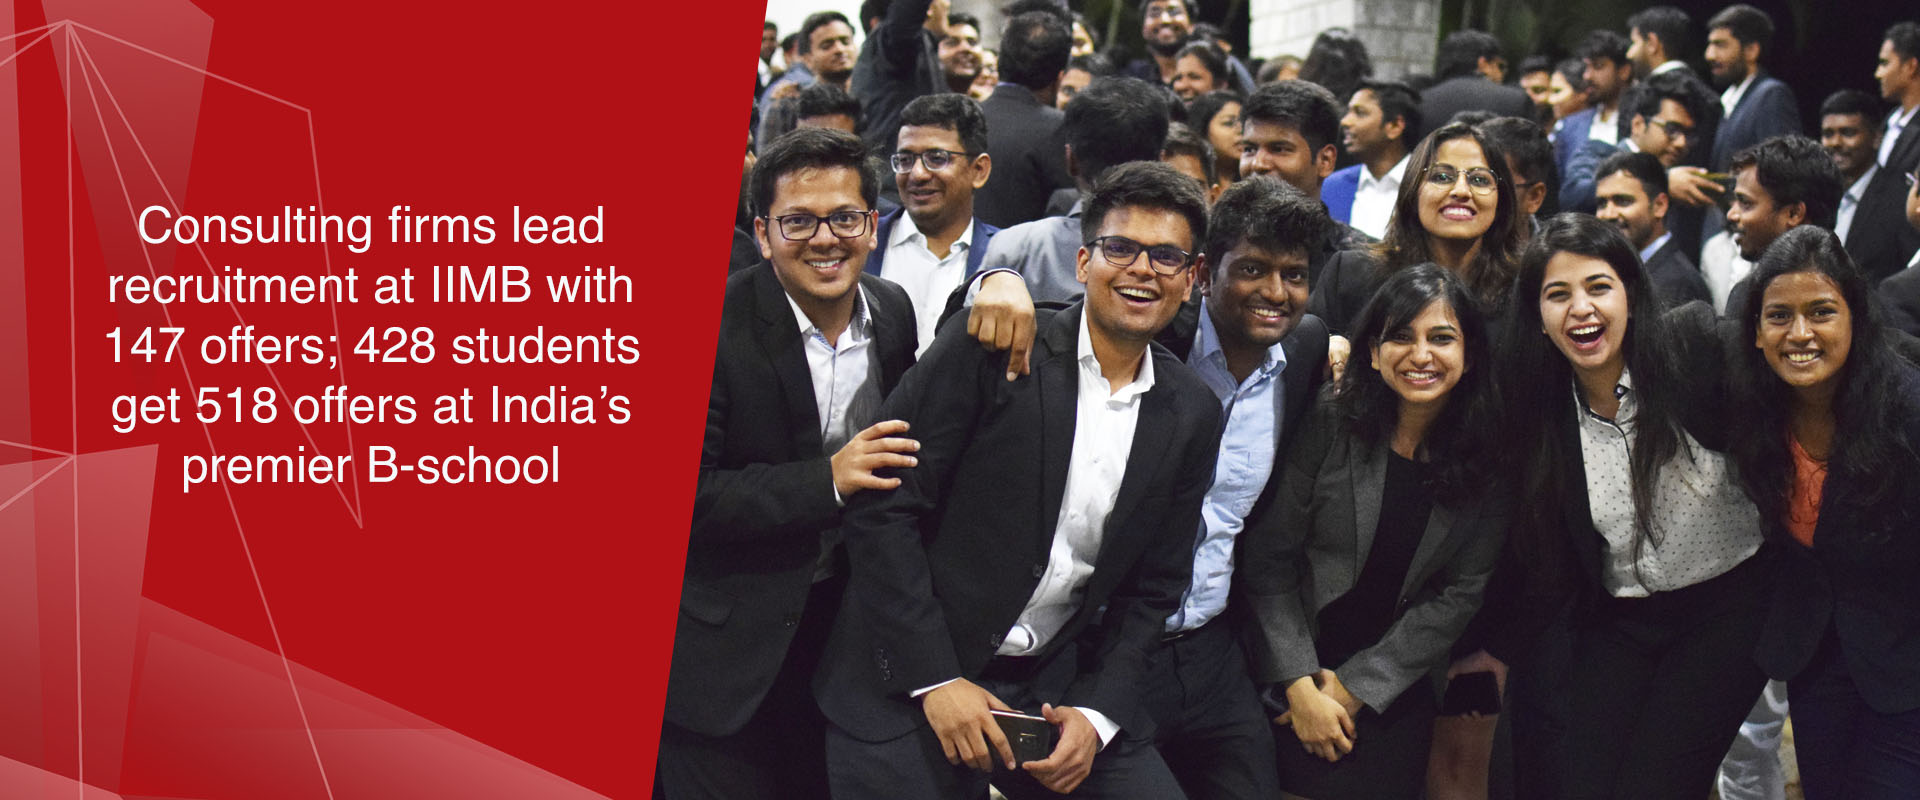 Consulting firms lead recruitment at IIMB with 147 offers